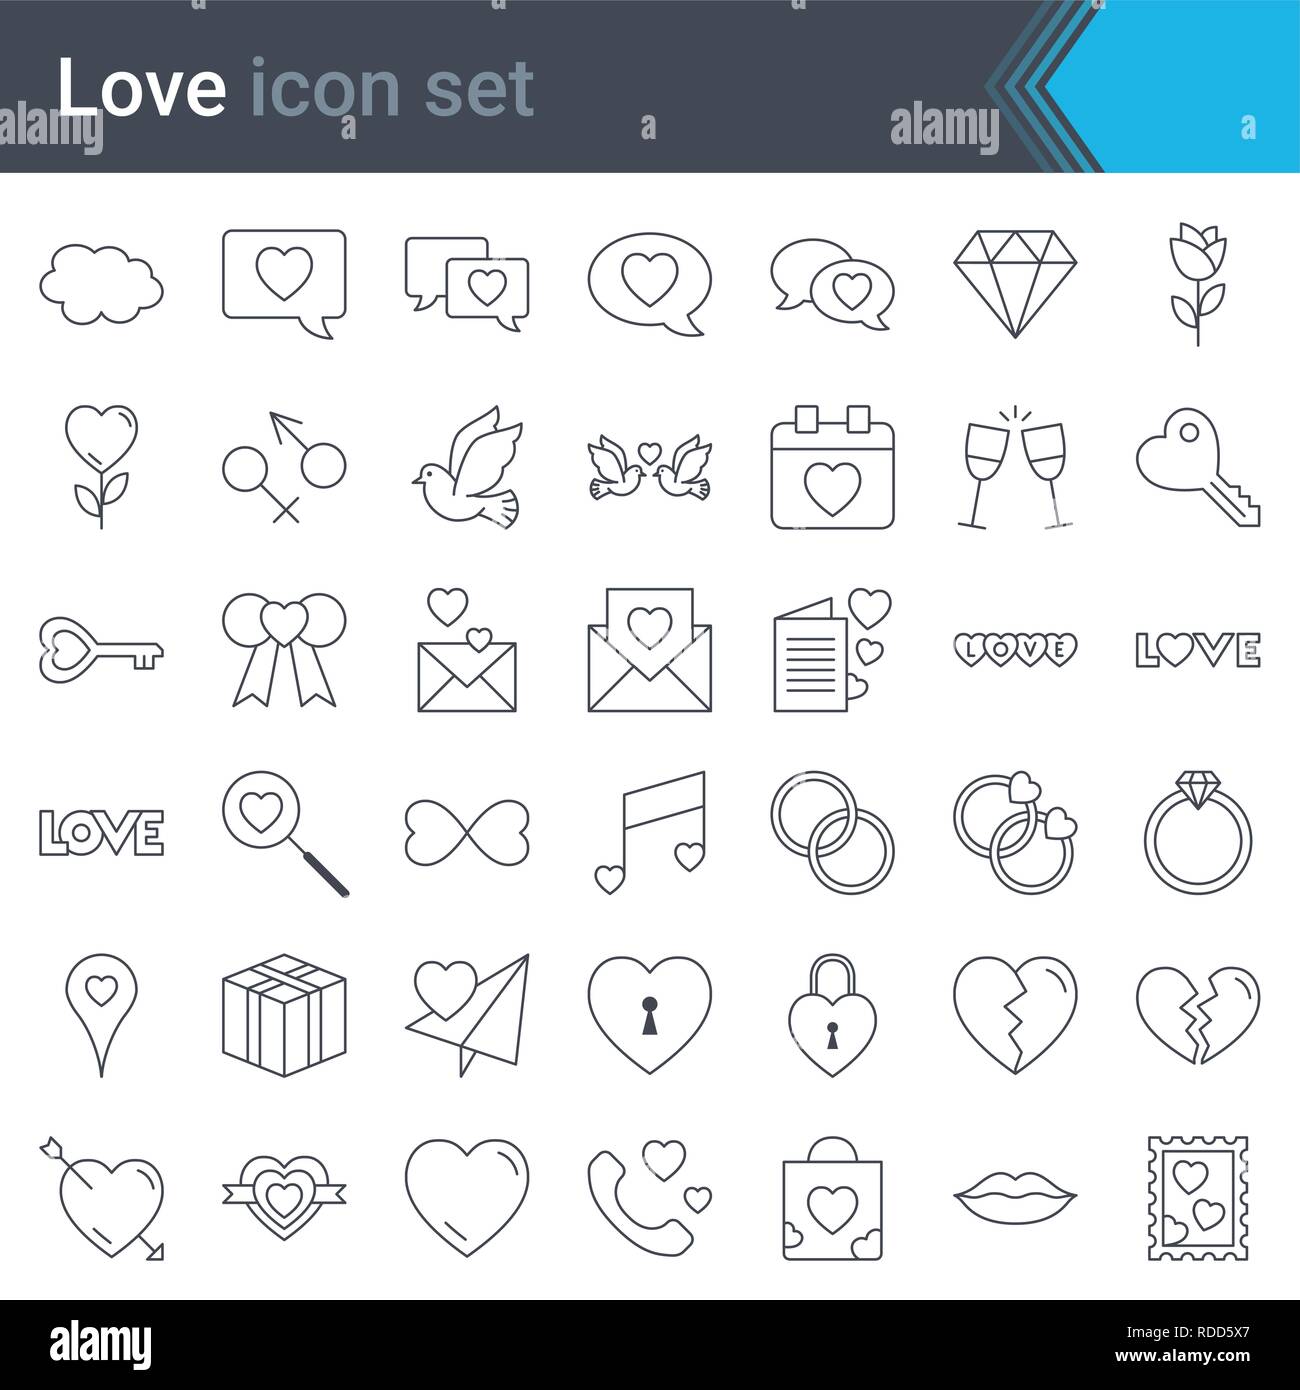 Stroke vector love icons isolated on white background. Love is in the air - modern outline style heart icons collection. Valentines day, Mothers day. Stock Vector